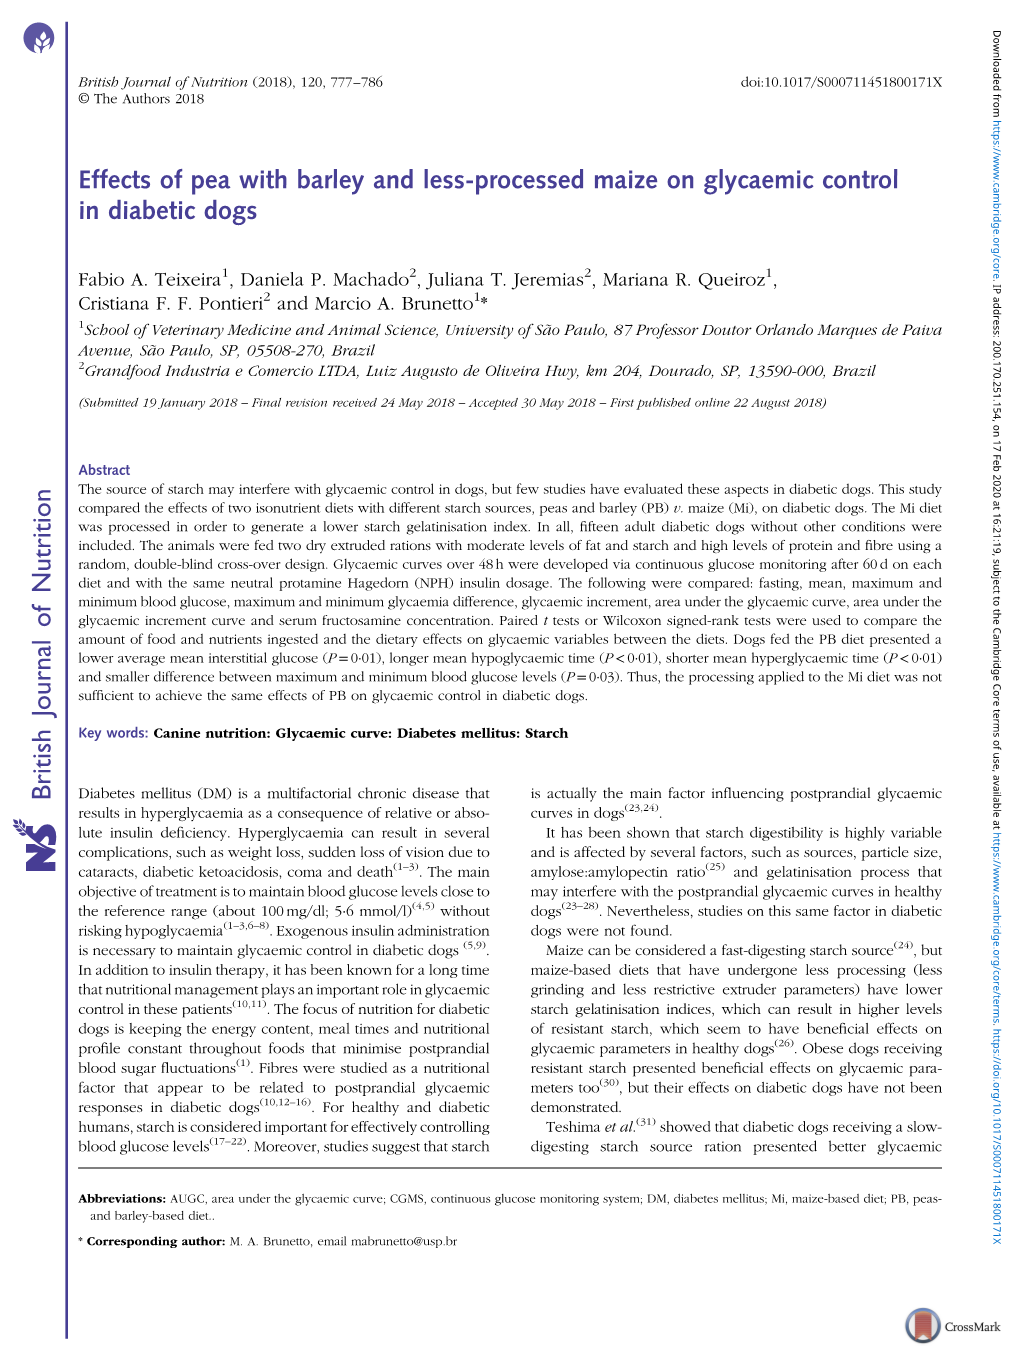 Effects of Pea with Barley and Less-Processed Maize on Glycaemic Control in Diabetic Dogs